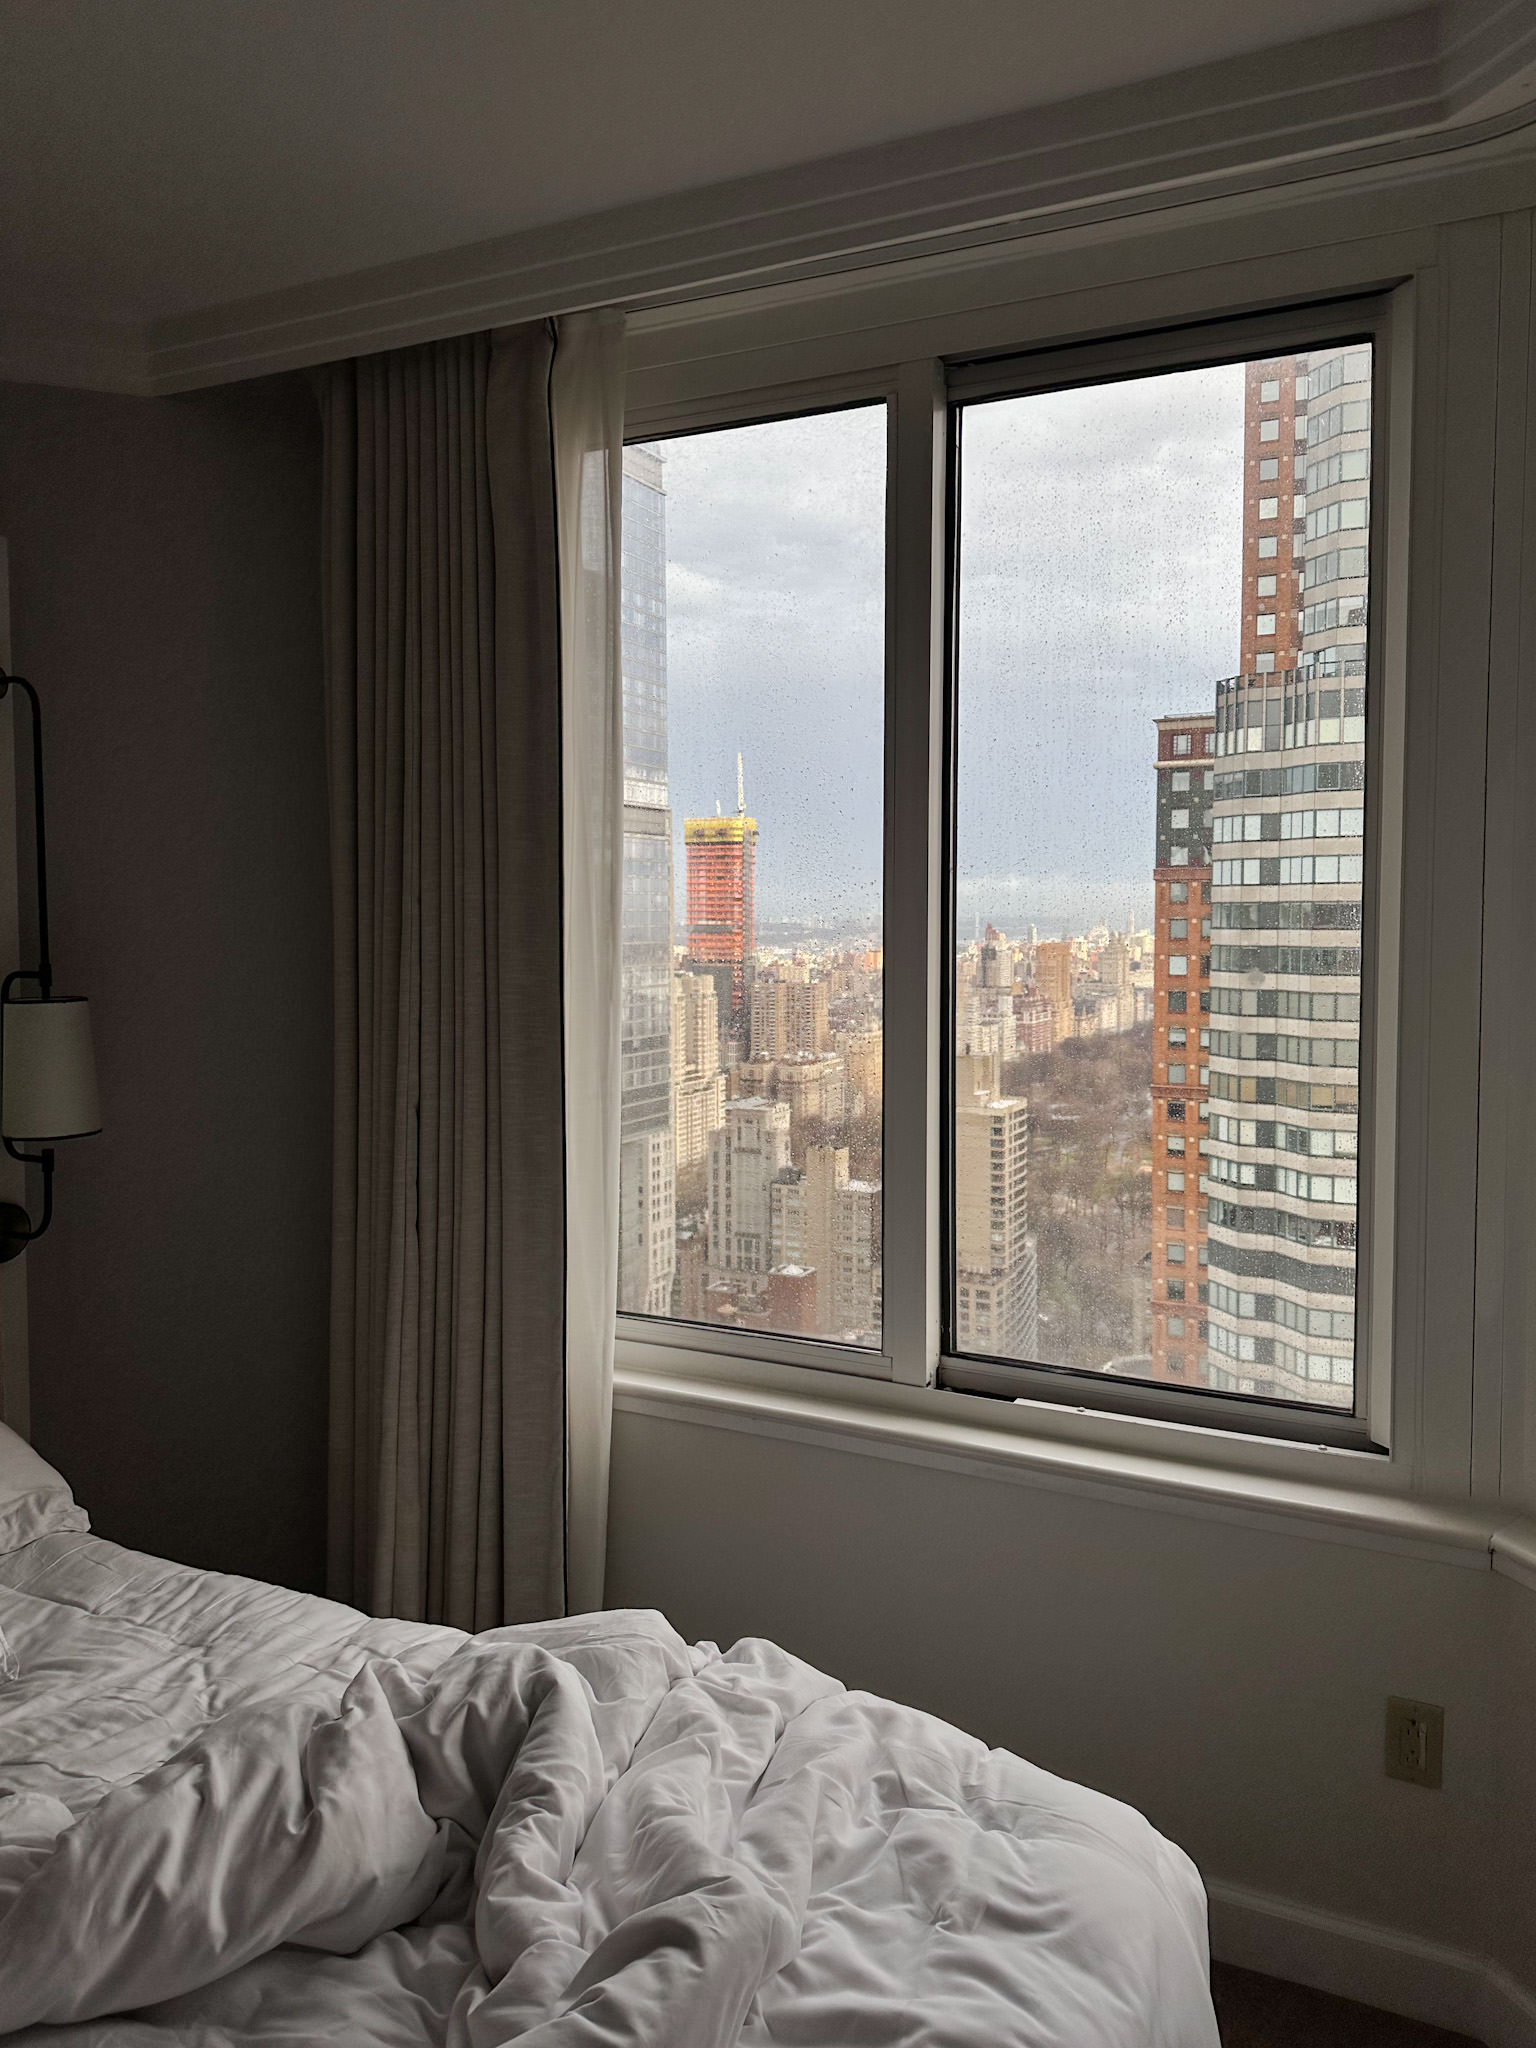 Bed in front of a window where you can see New York City's skyline